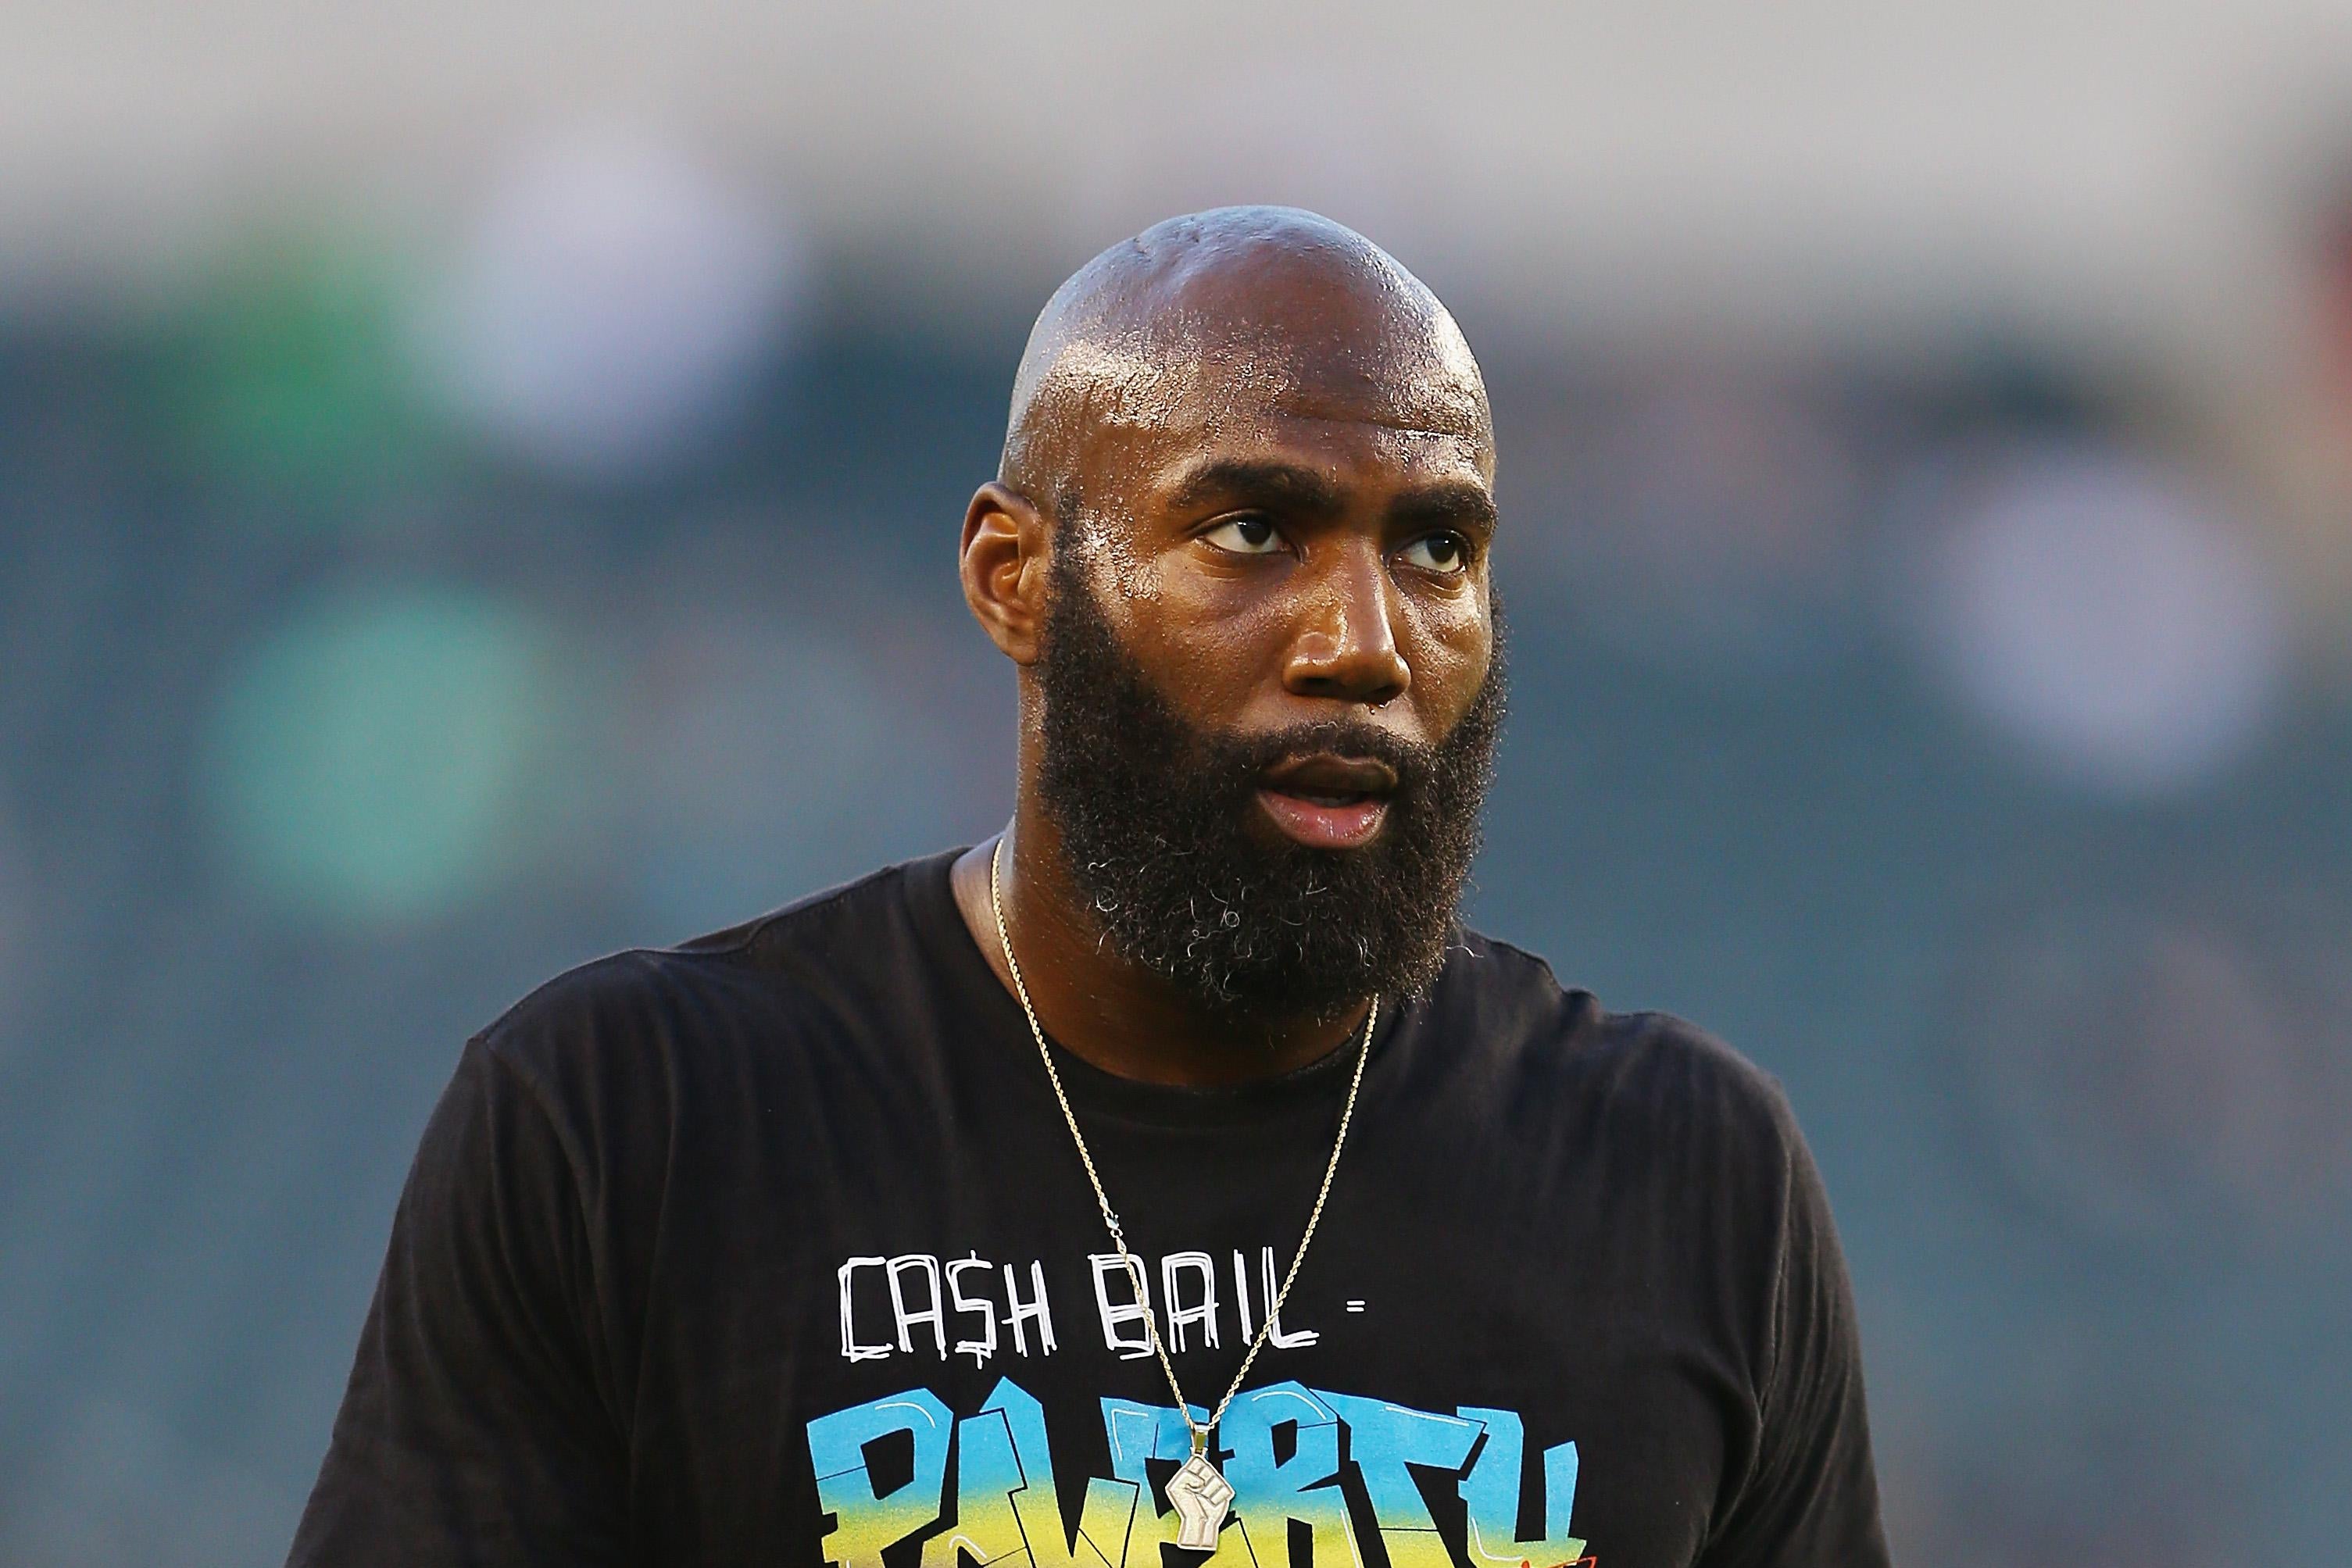 PHILADELPHIA, PA - SEPTEMBER 06:  Malcolm Jenkins #27 of the Philadelphia Eagles looks on before the game against the Atlanta Falcons at Lincoln Financial Field on September 6, 2018 in Philadelphia, Pennsylvania.  (Photo by Mitchell Leff/Getty Images)